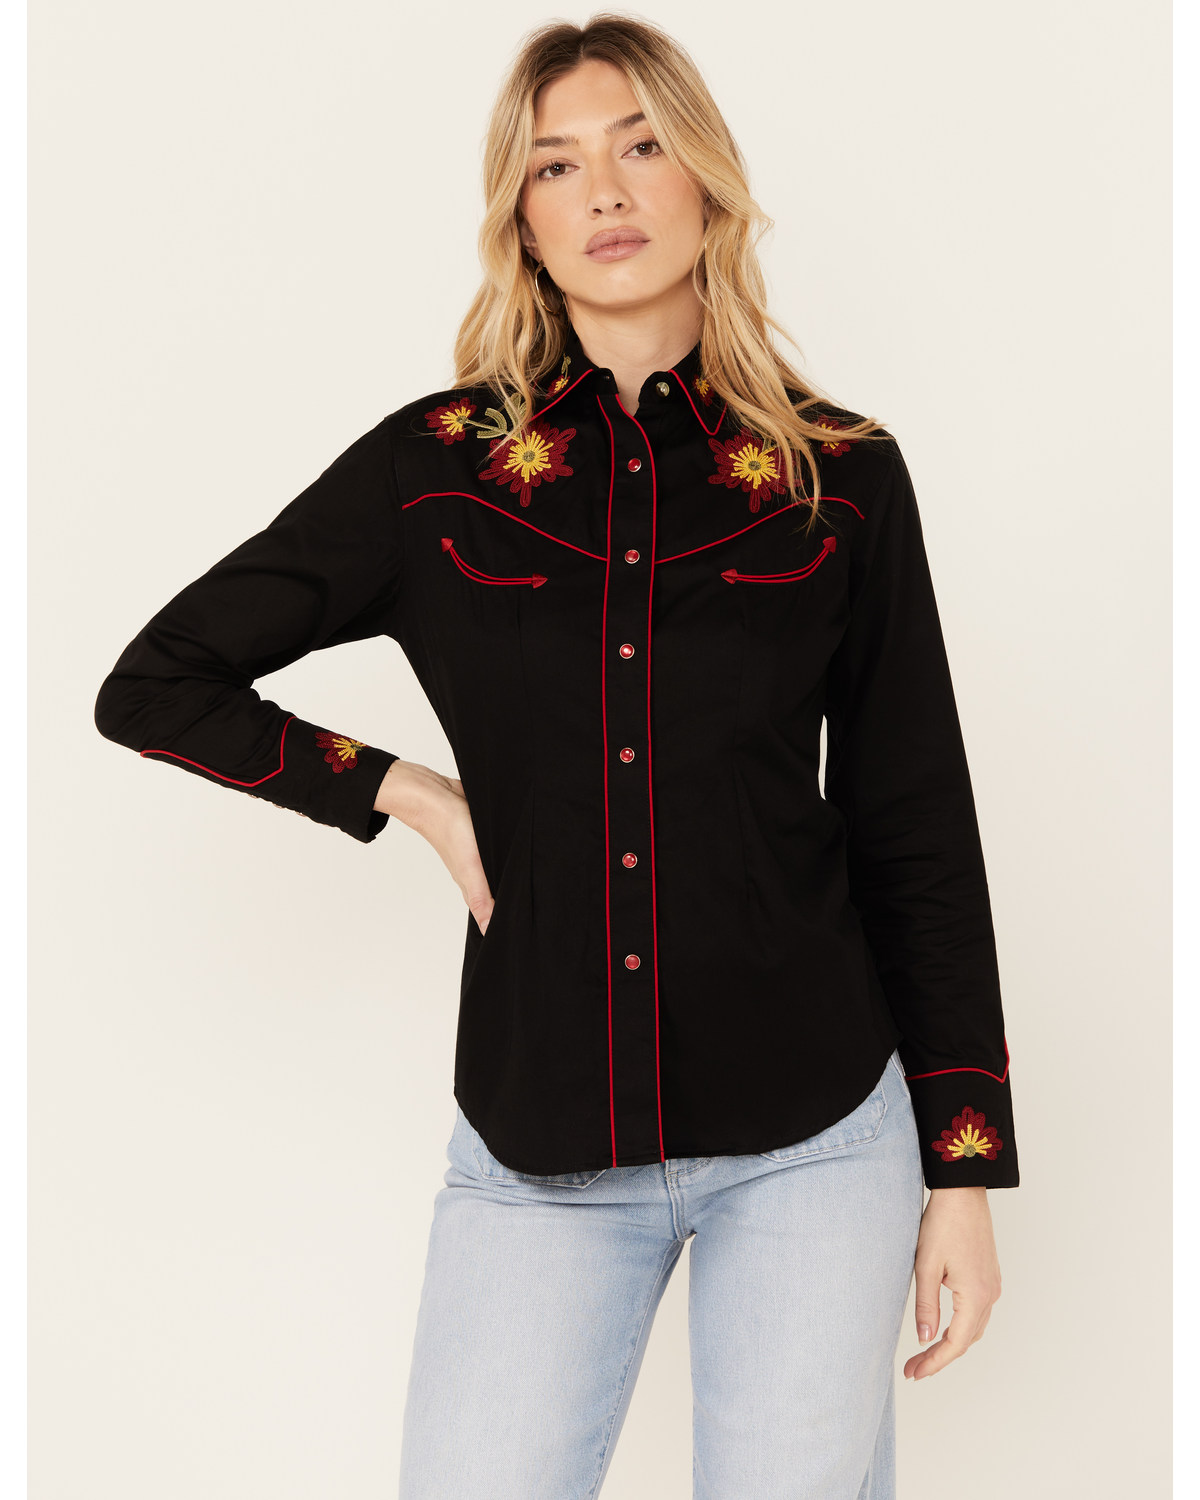 Rockmount Ranchwear Women's Vintage Floral Embroidered Long Sleeve Snap Western Shirt